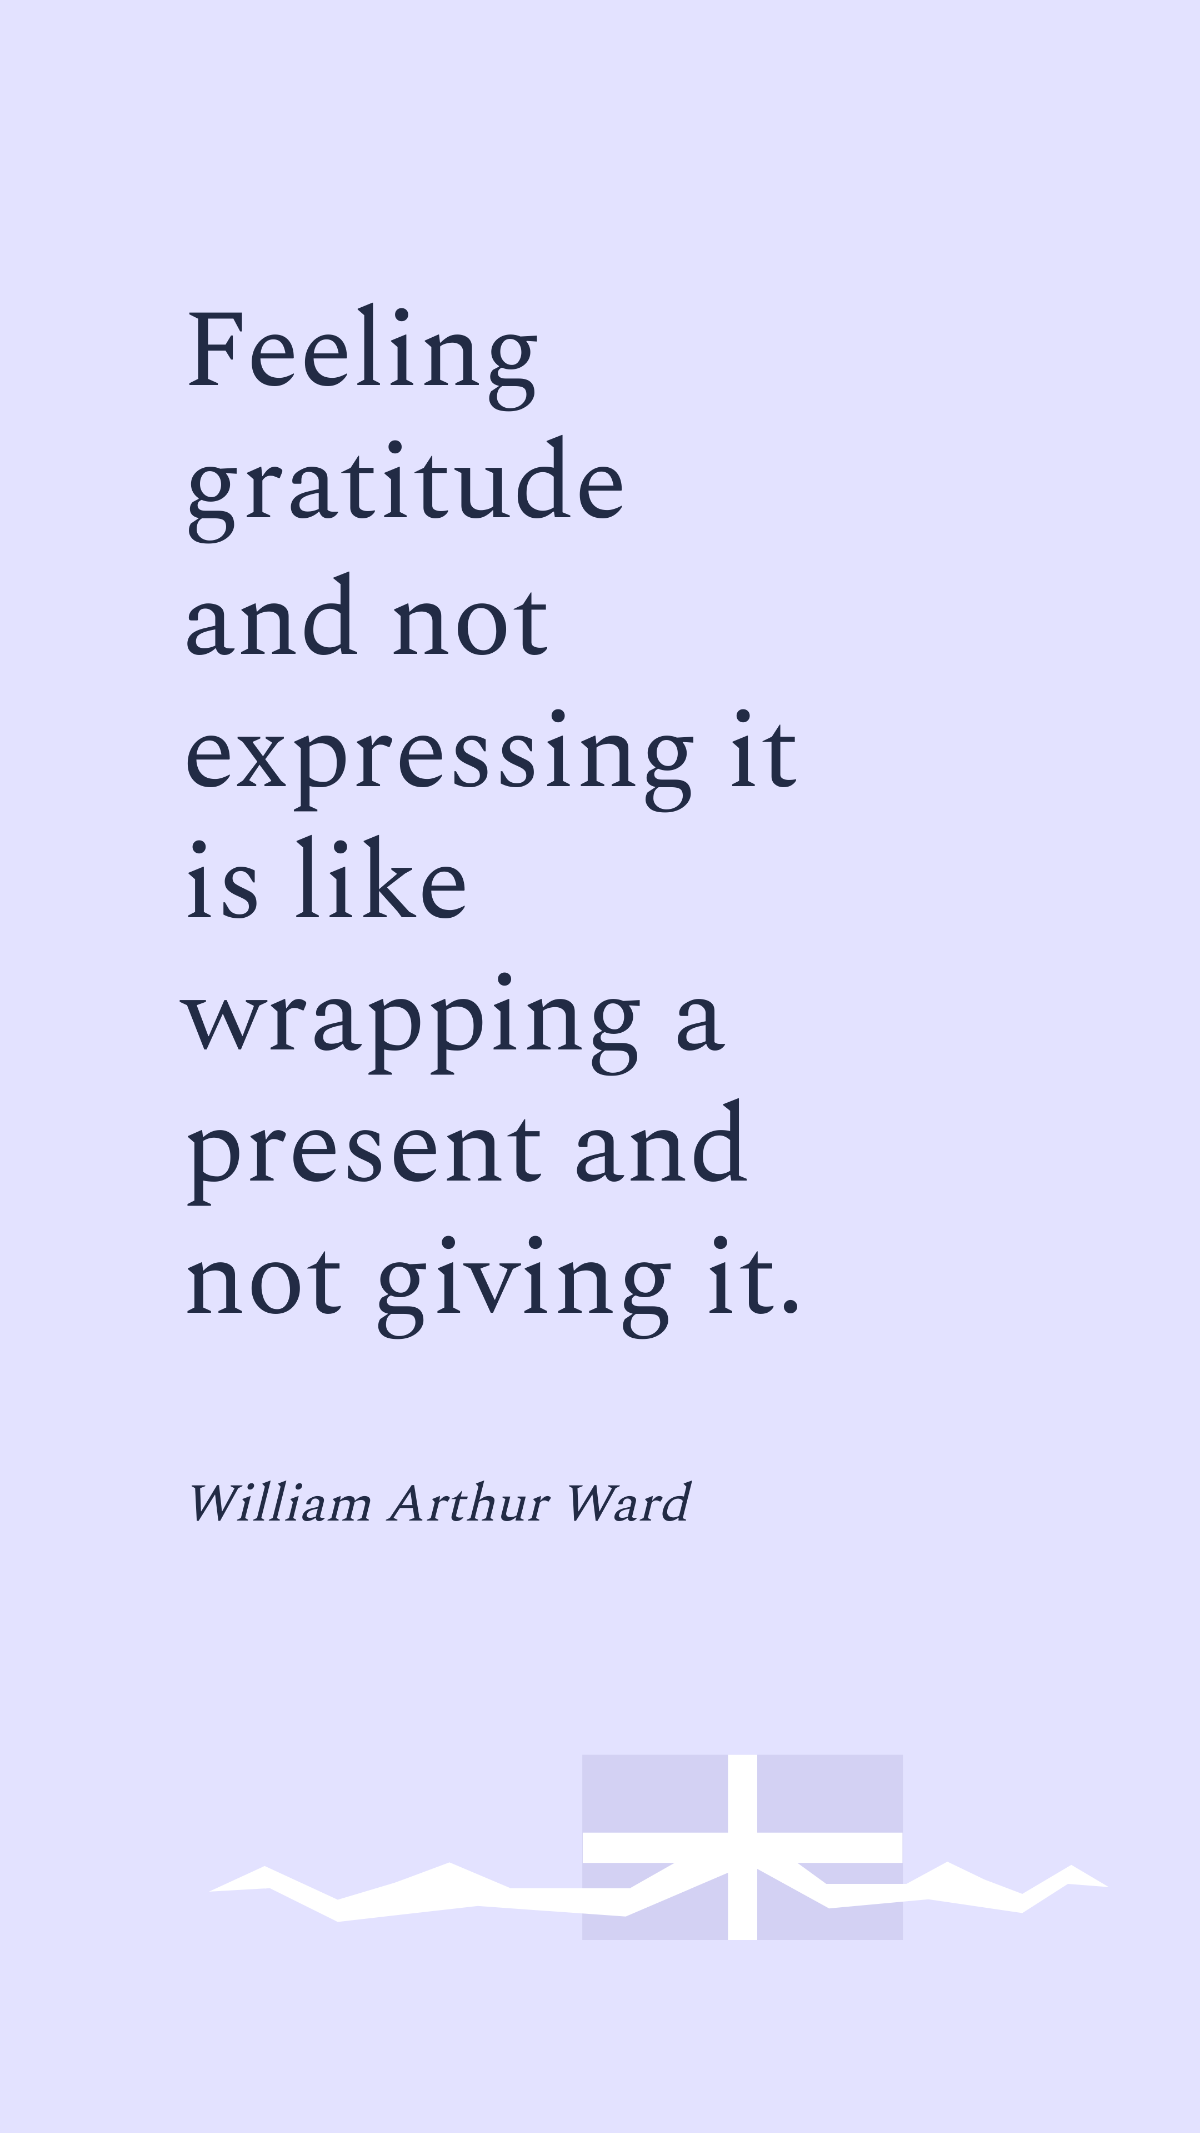 Free William Arthur Ward - Feeling gratitude and not expressing it is like wrapping a present and not giving it.  Template